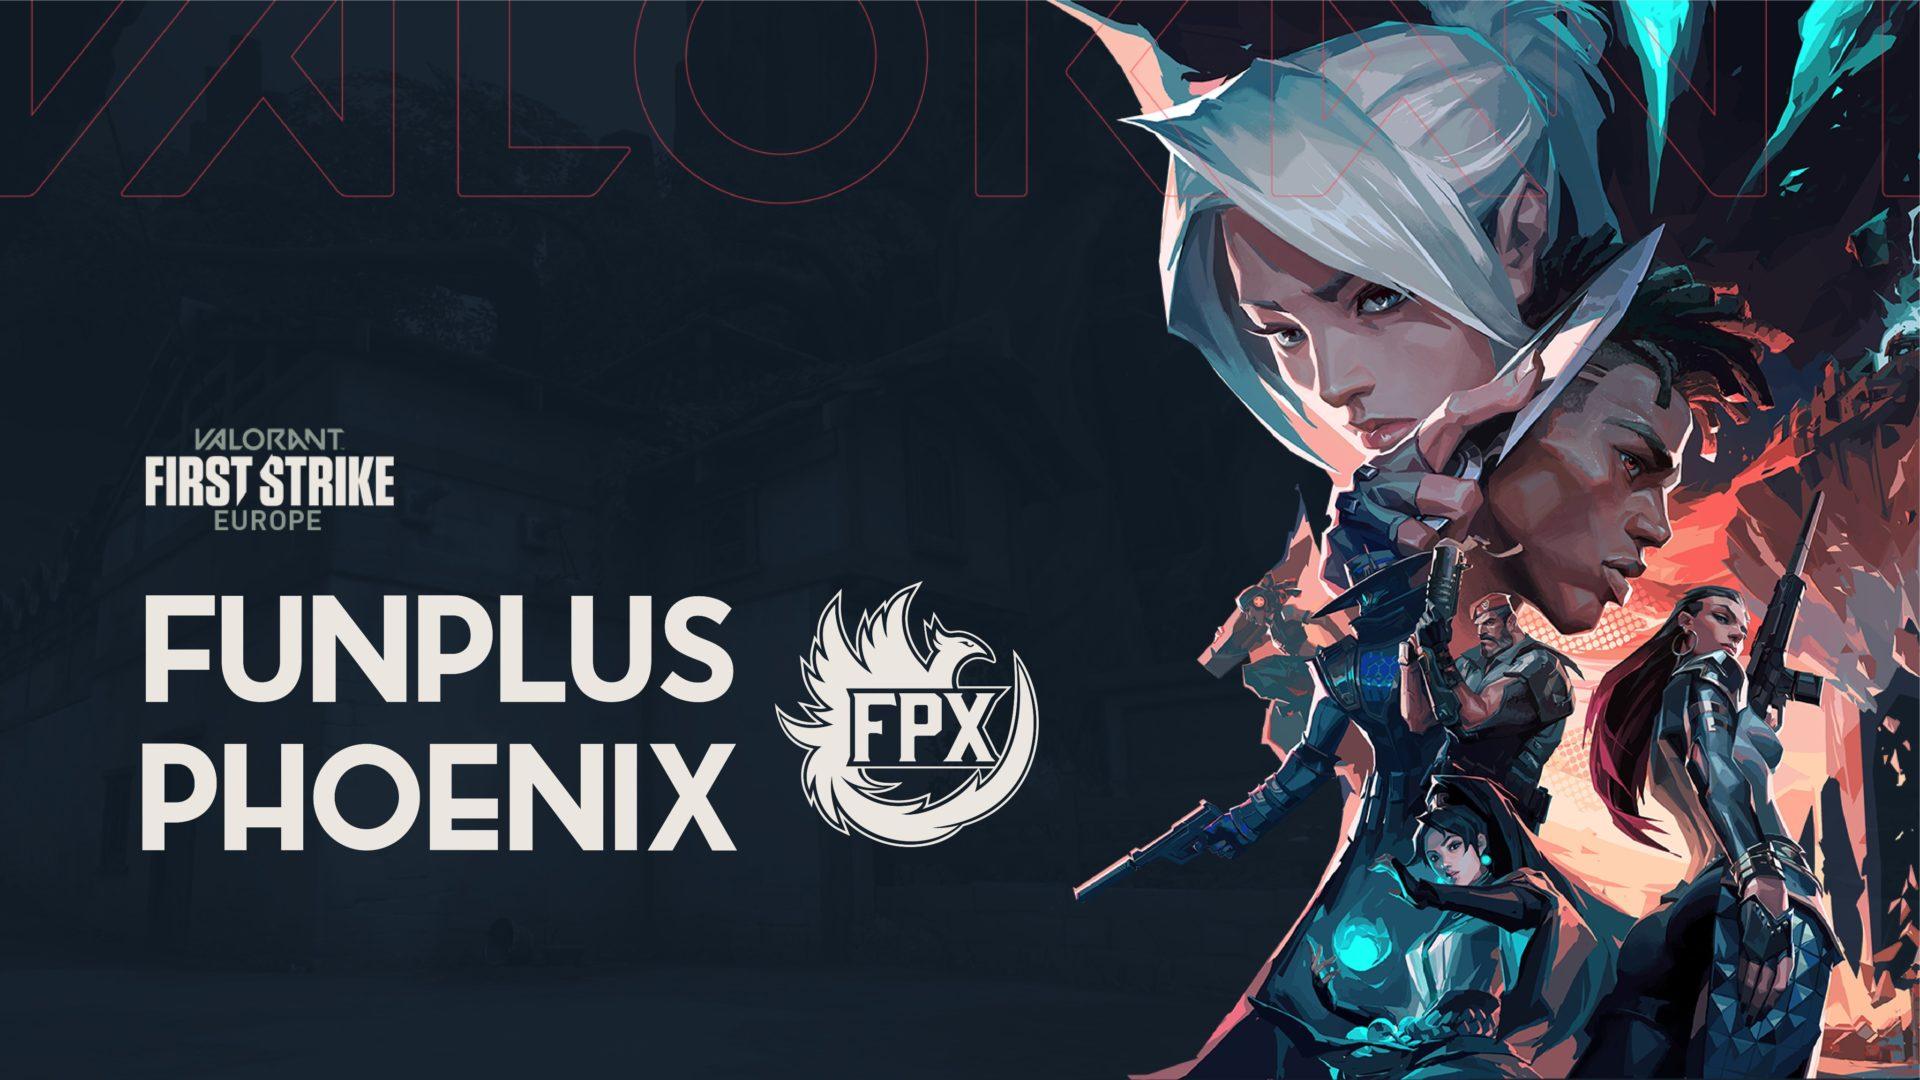 FunPlus Phoenix replaced by Team Liquid at VCT Masters Reykjavik due to  travel restrictions - Dexerto